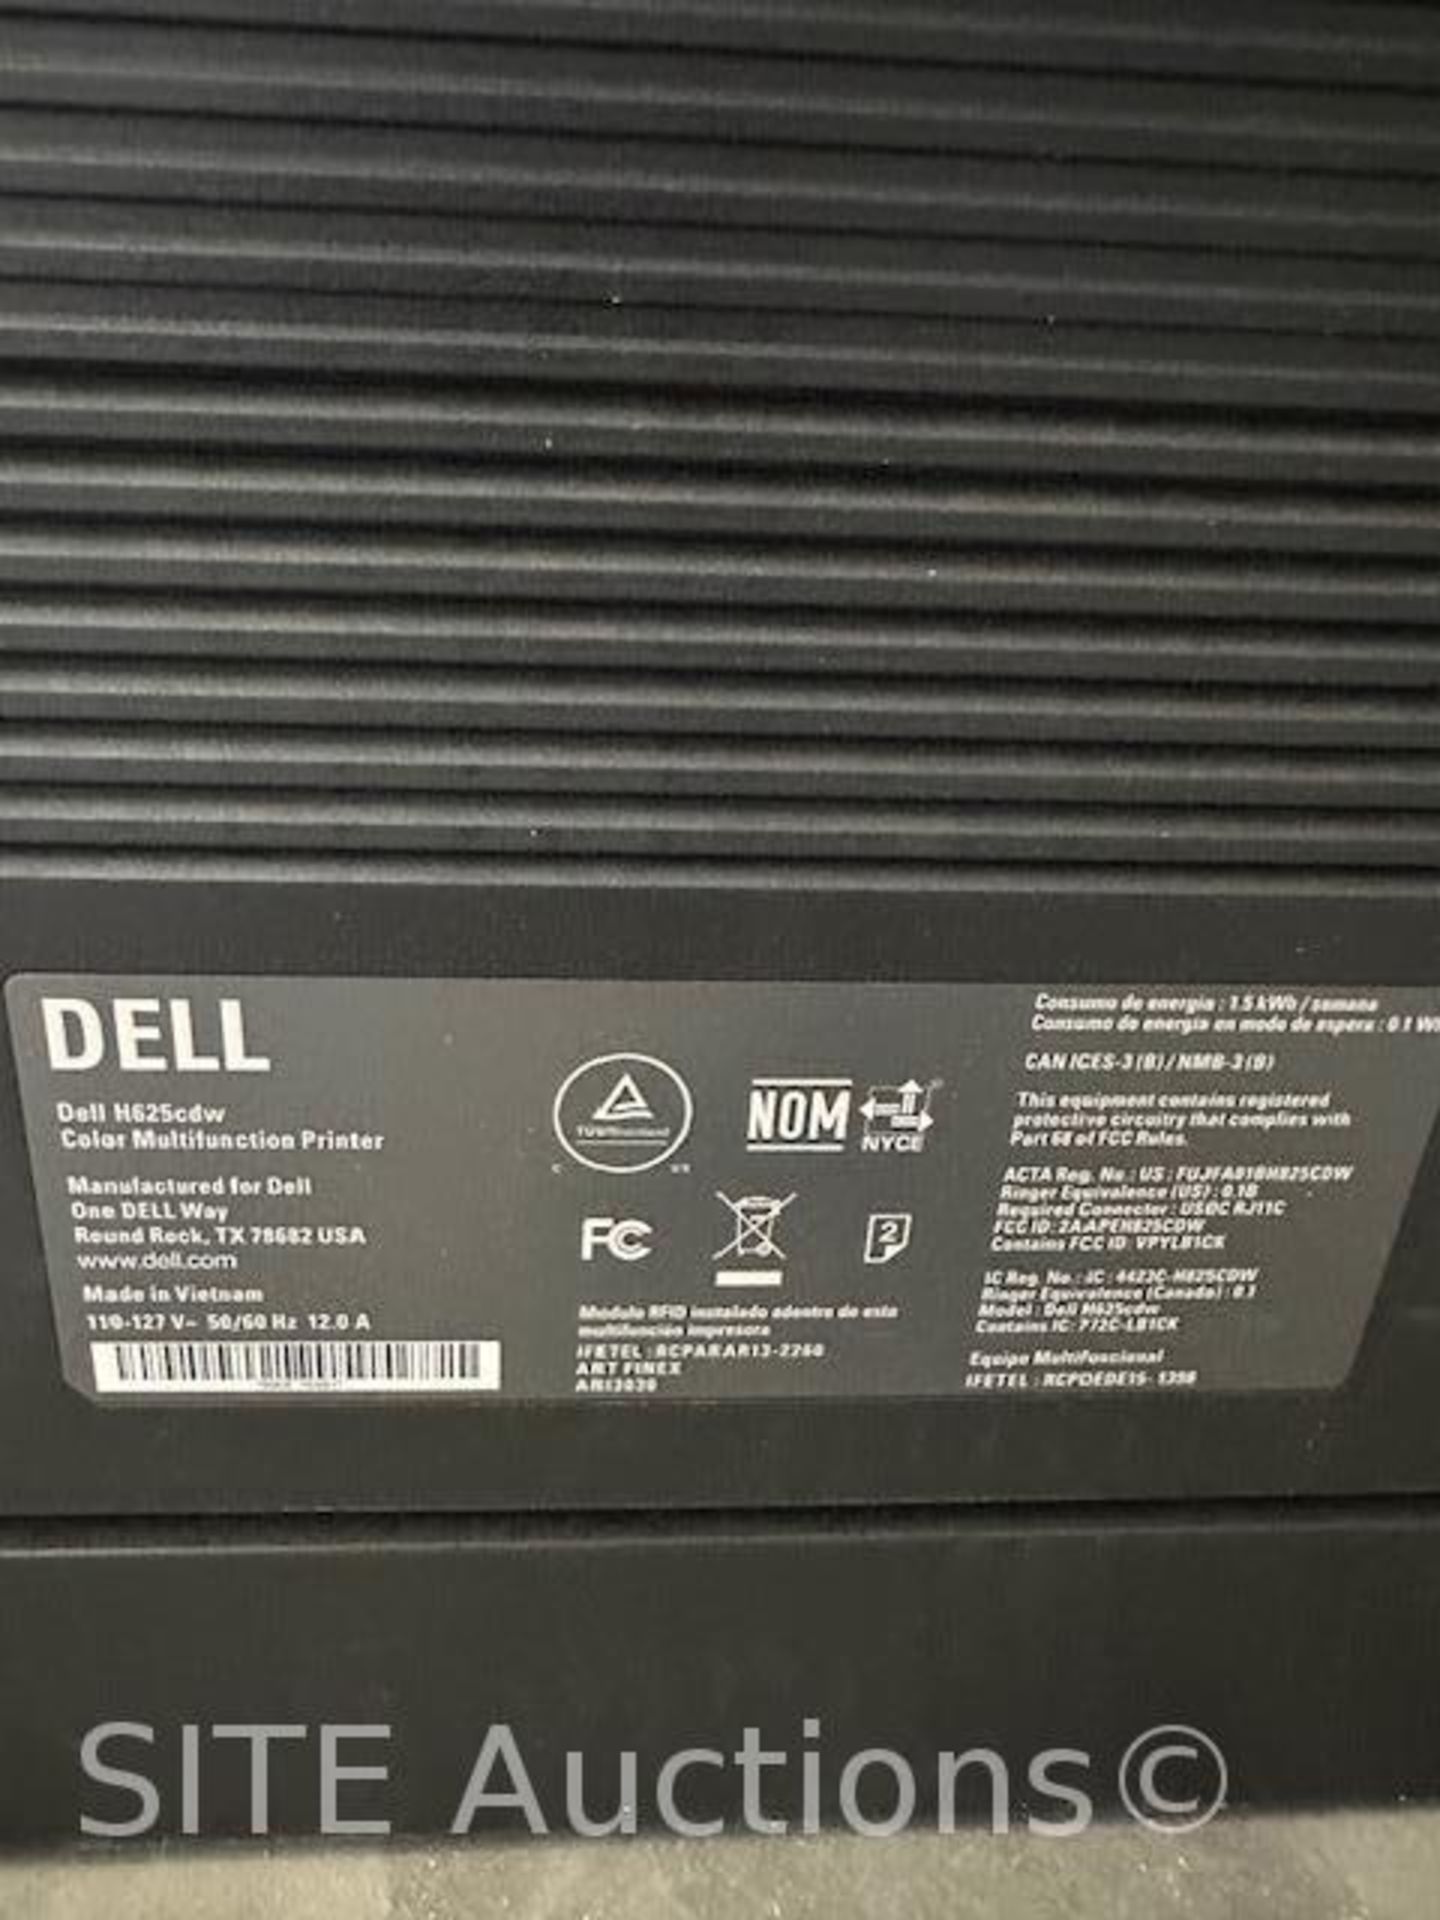 Dell Color Smart H625cdw Multifunction Printer - Image 6 of 6